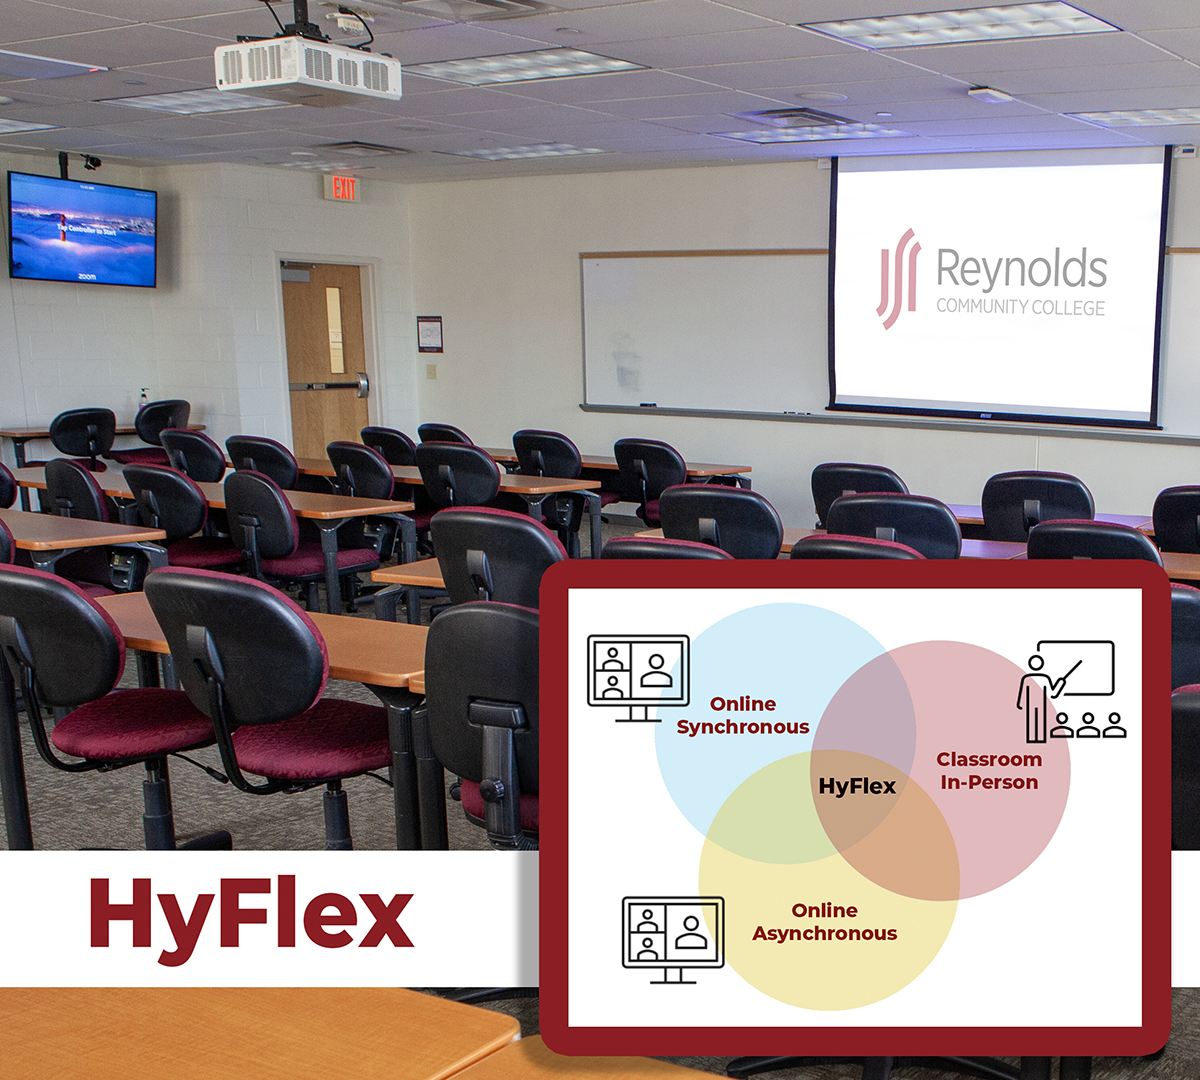 HyFlex Classroom with state of the art Zoom and video functions with ven diagram showing synchronous, asynchronous and in-person learning